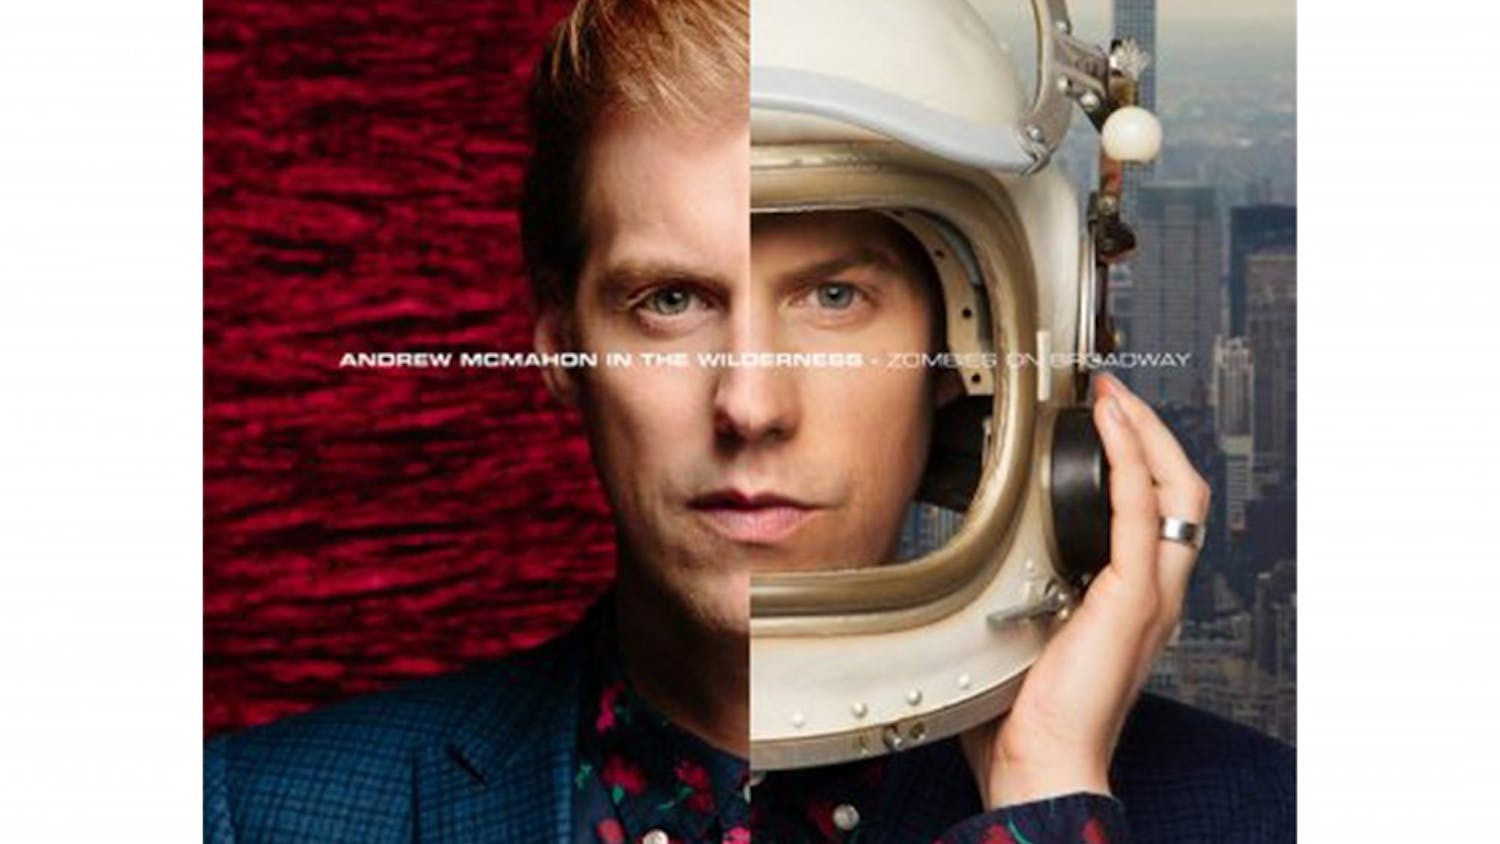 Andrew McMahon, who also performs as Andrew McMahon in the Wilderness, released "Zombies on Broadway" on Feb. 10, 2017. He will perform at 8 p.m. Tuesday at the Bluebird Nightclub.